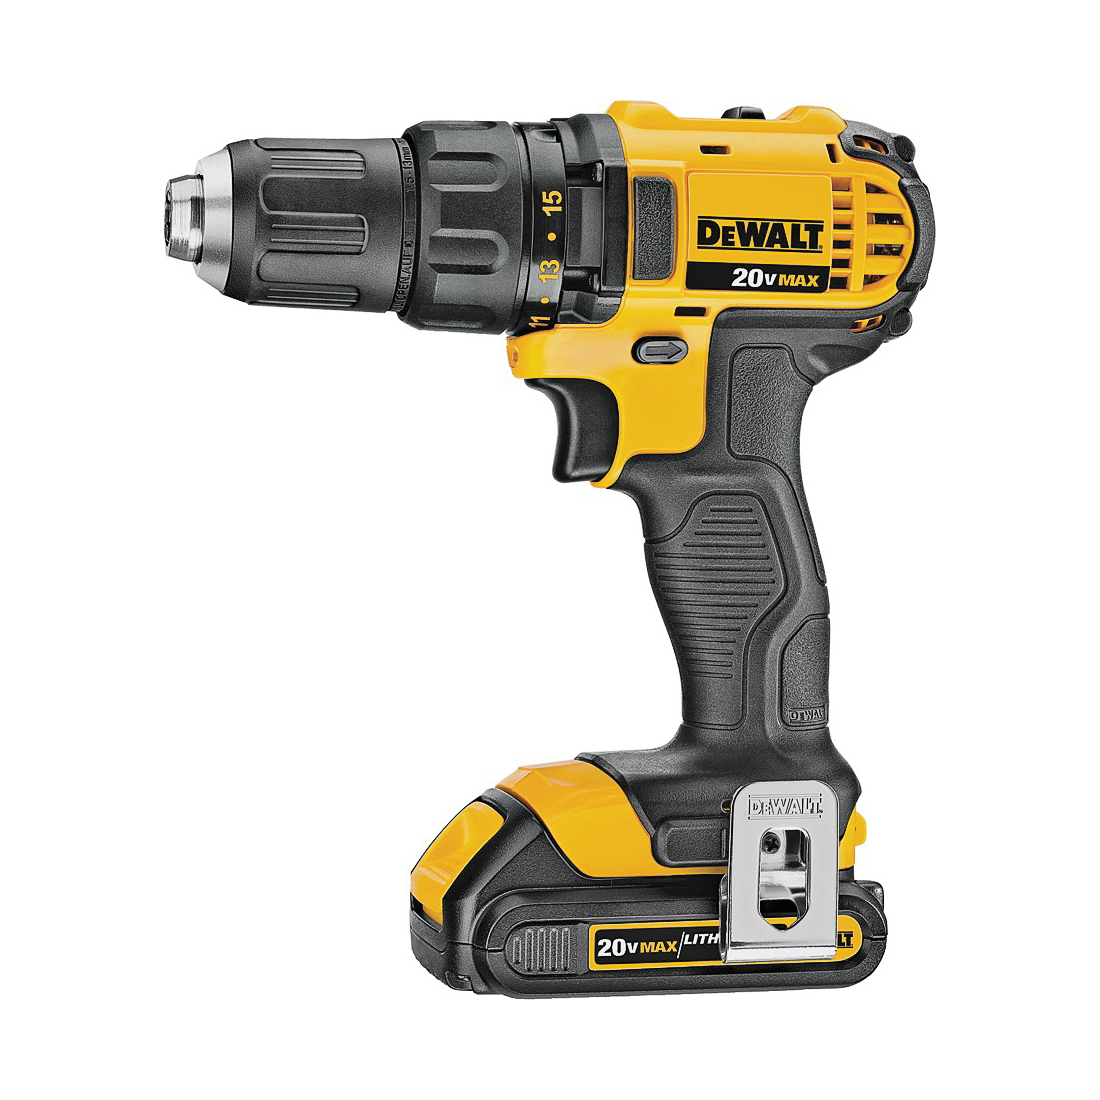 DCD780C2 Drill/Driver Kit, Battery Included, 20 V, 1/2 in Chuck, Keyless, Ratcheting Chuck